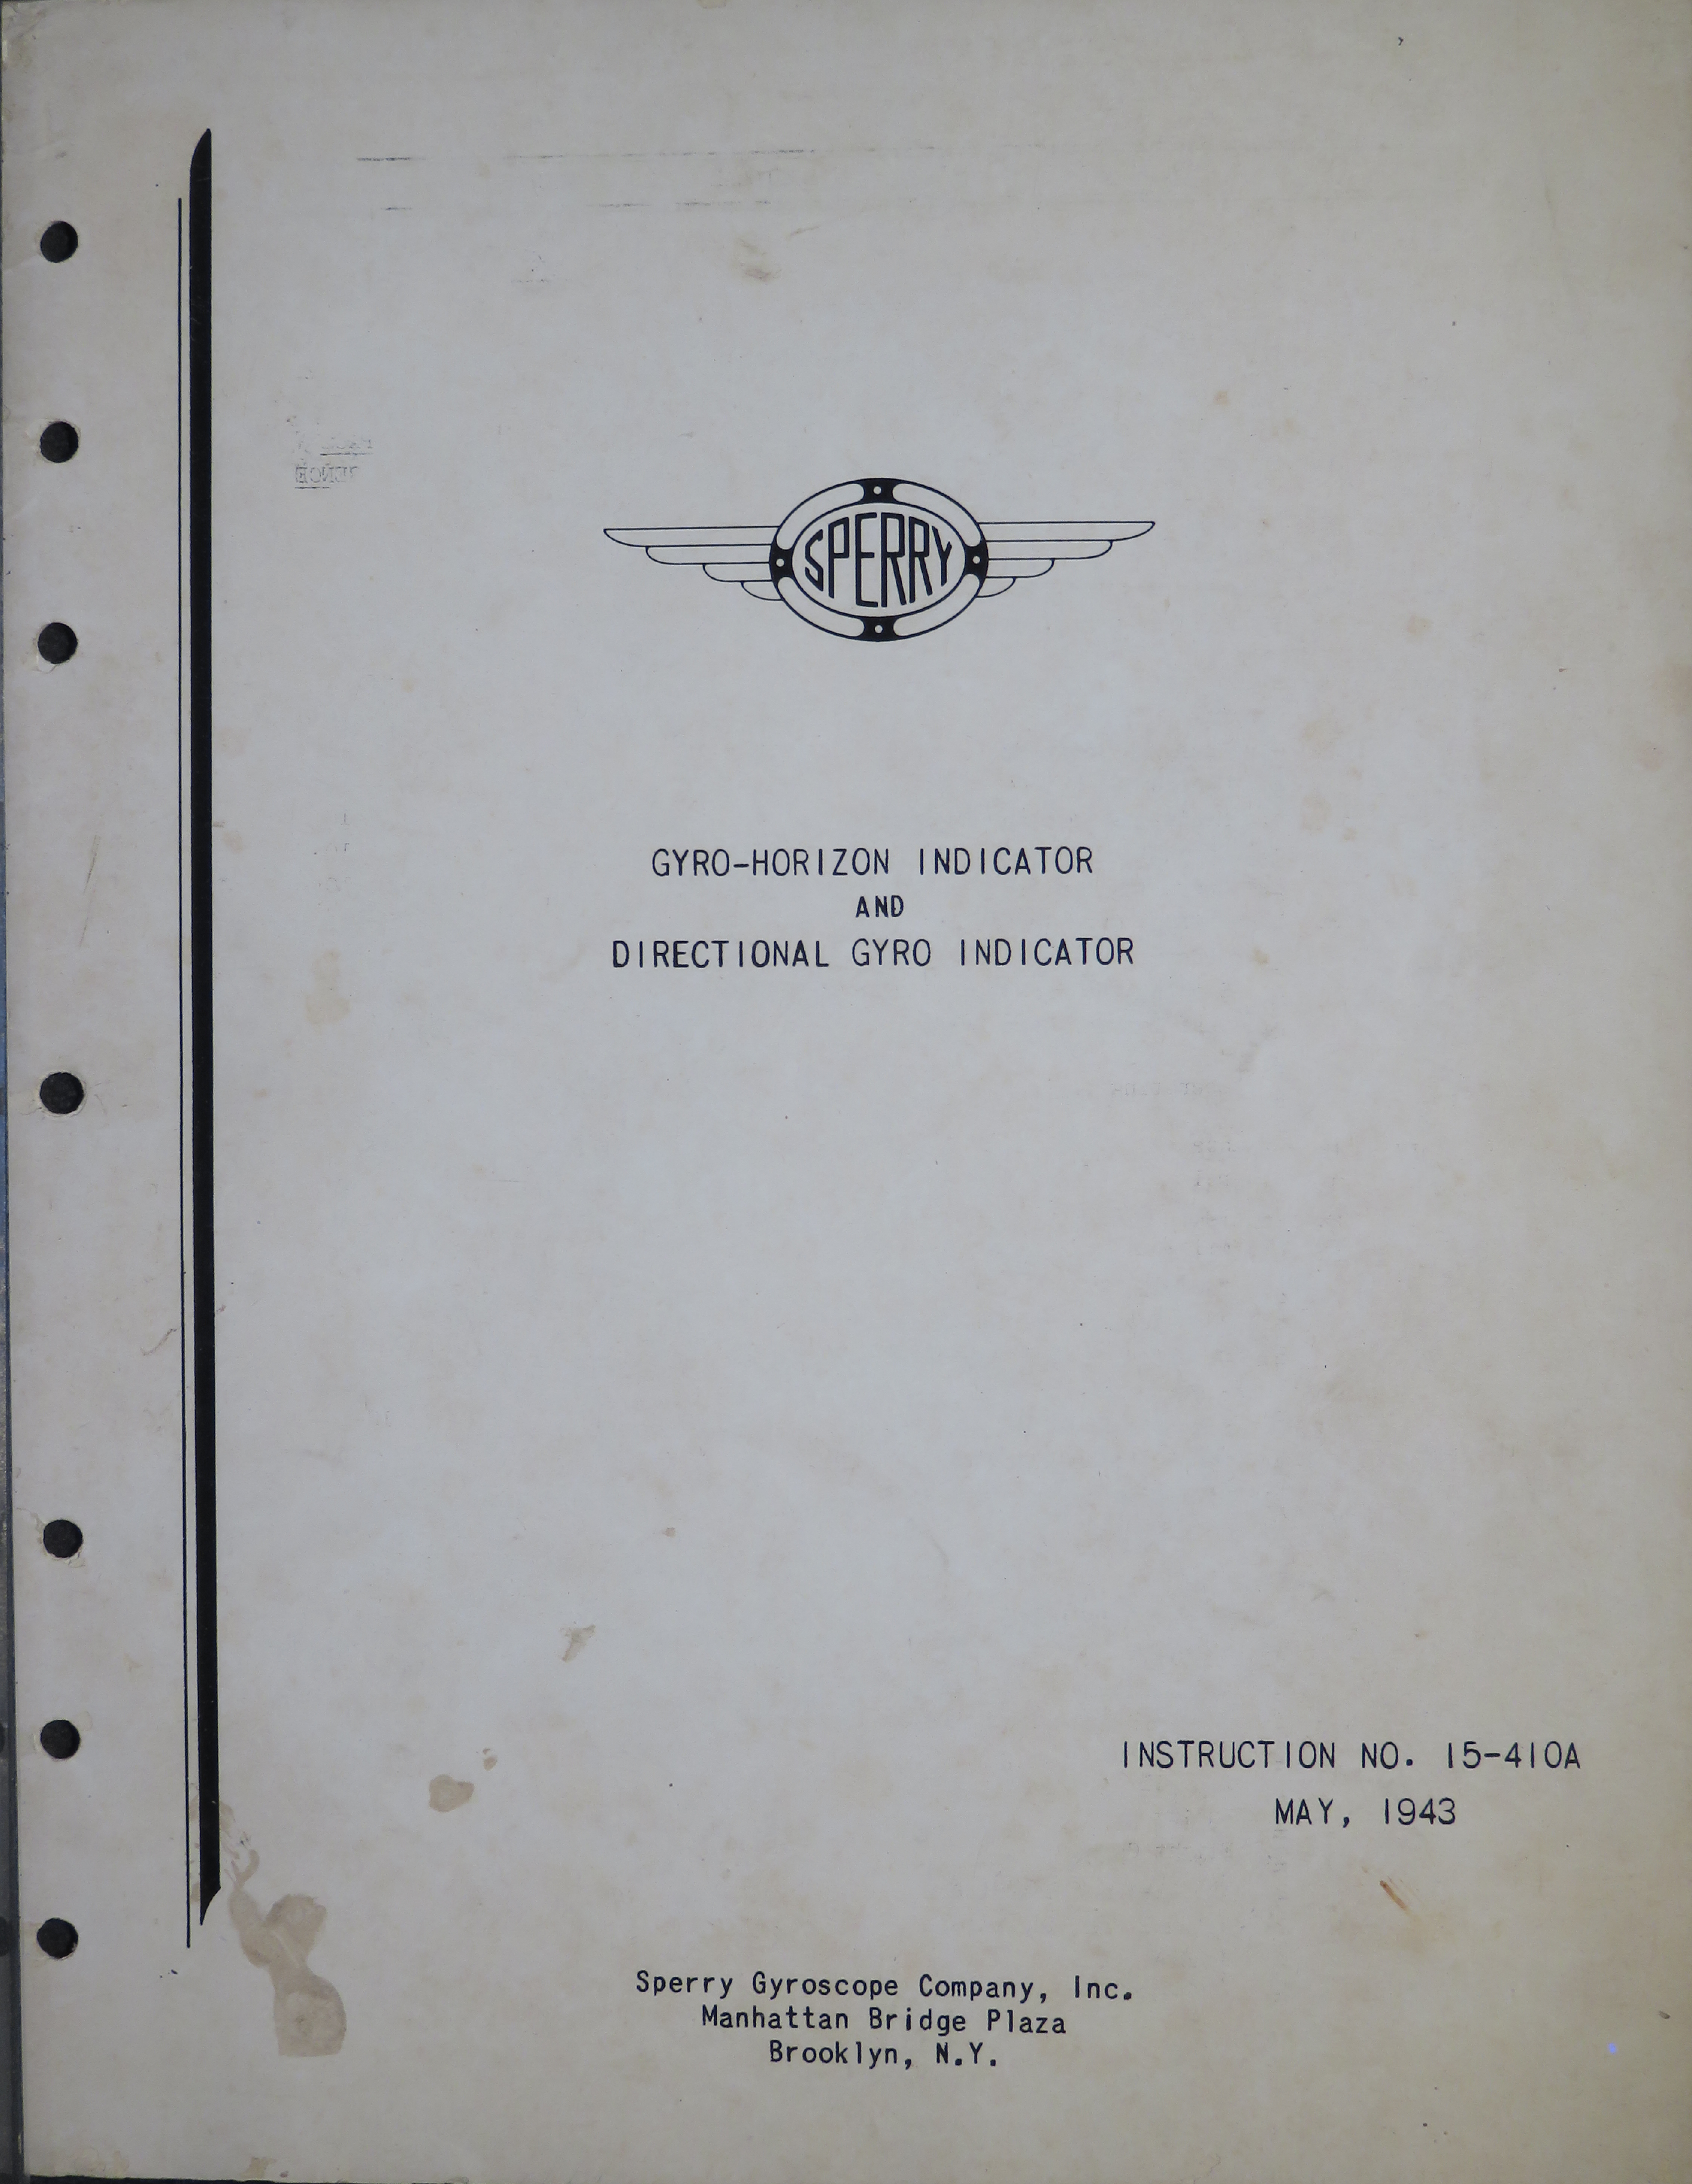 Sample page 1 from AirCorps Library document: Gyro-Horizon Indicator and Directional Gyro Indicator